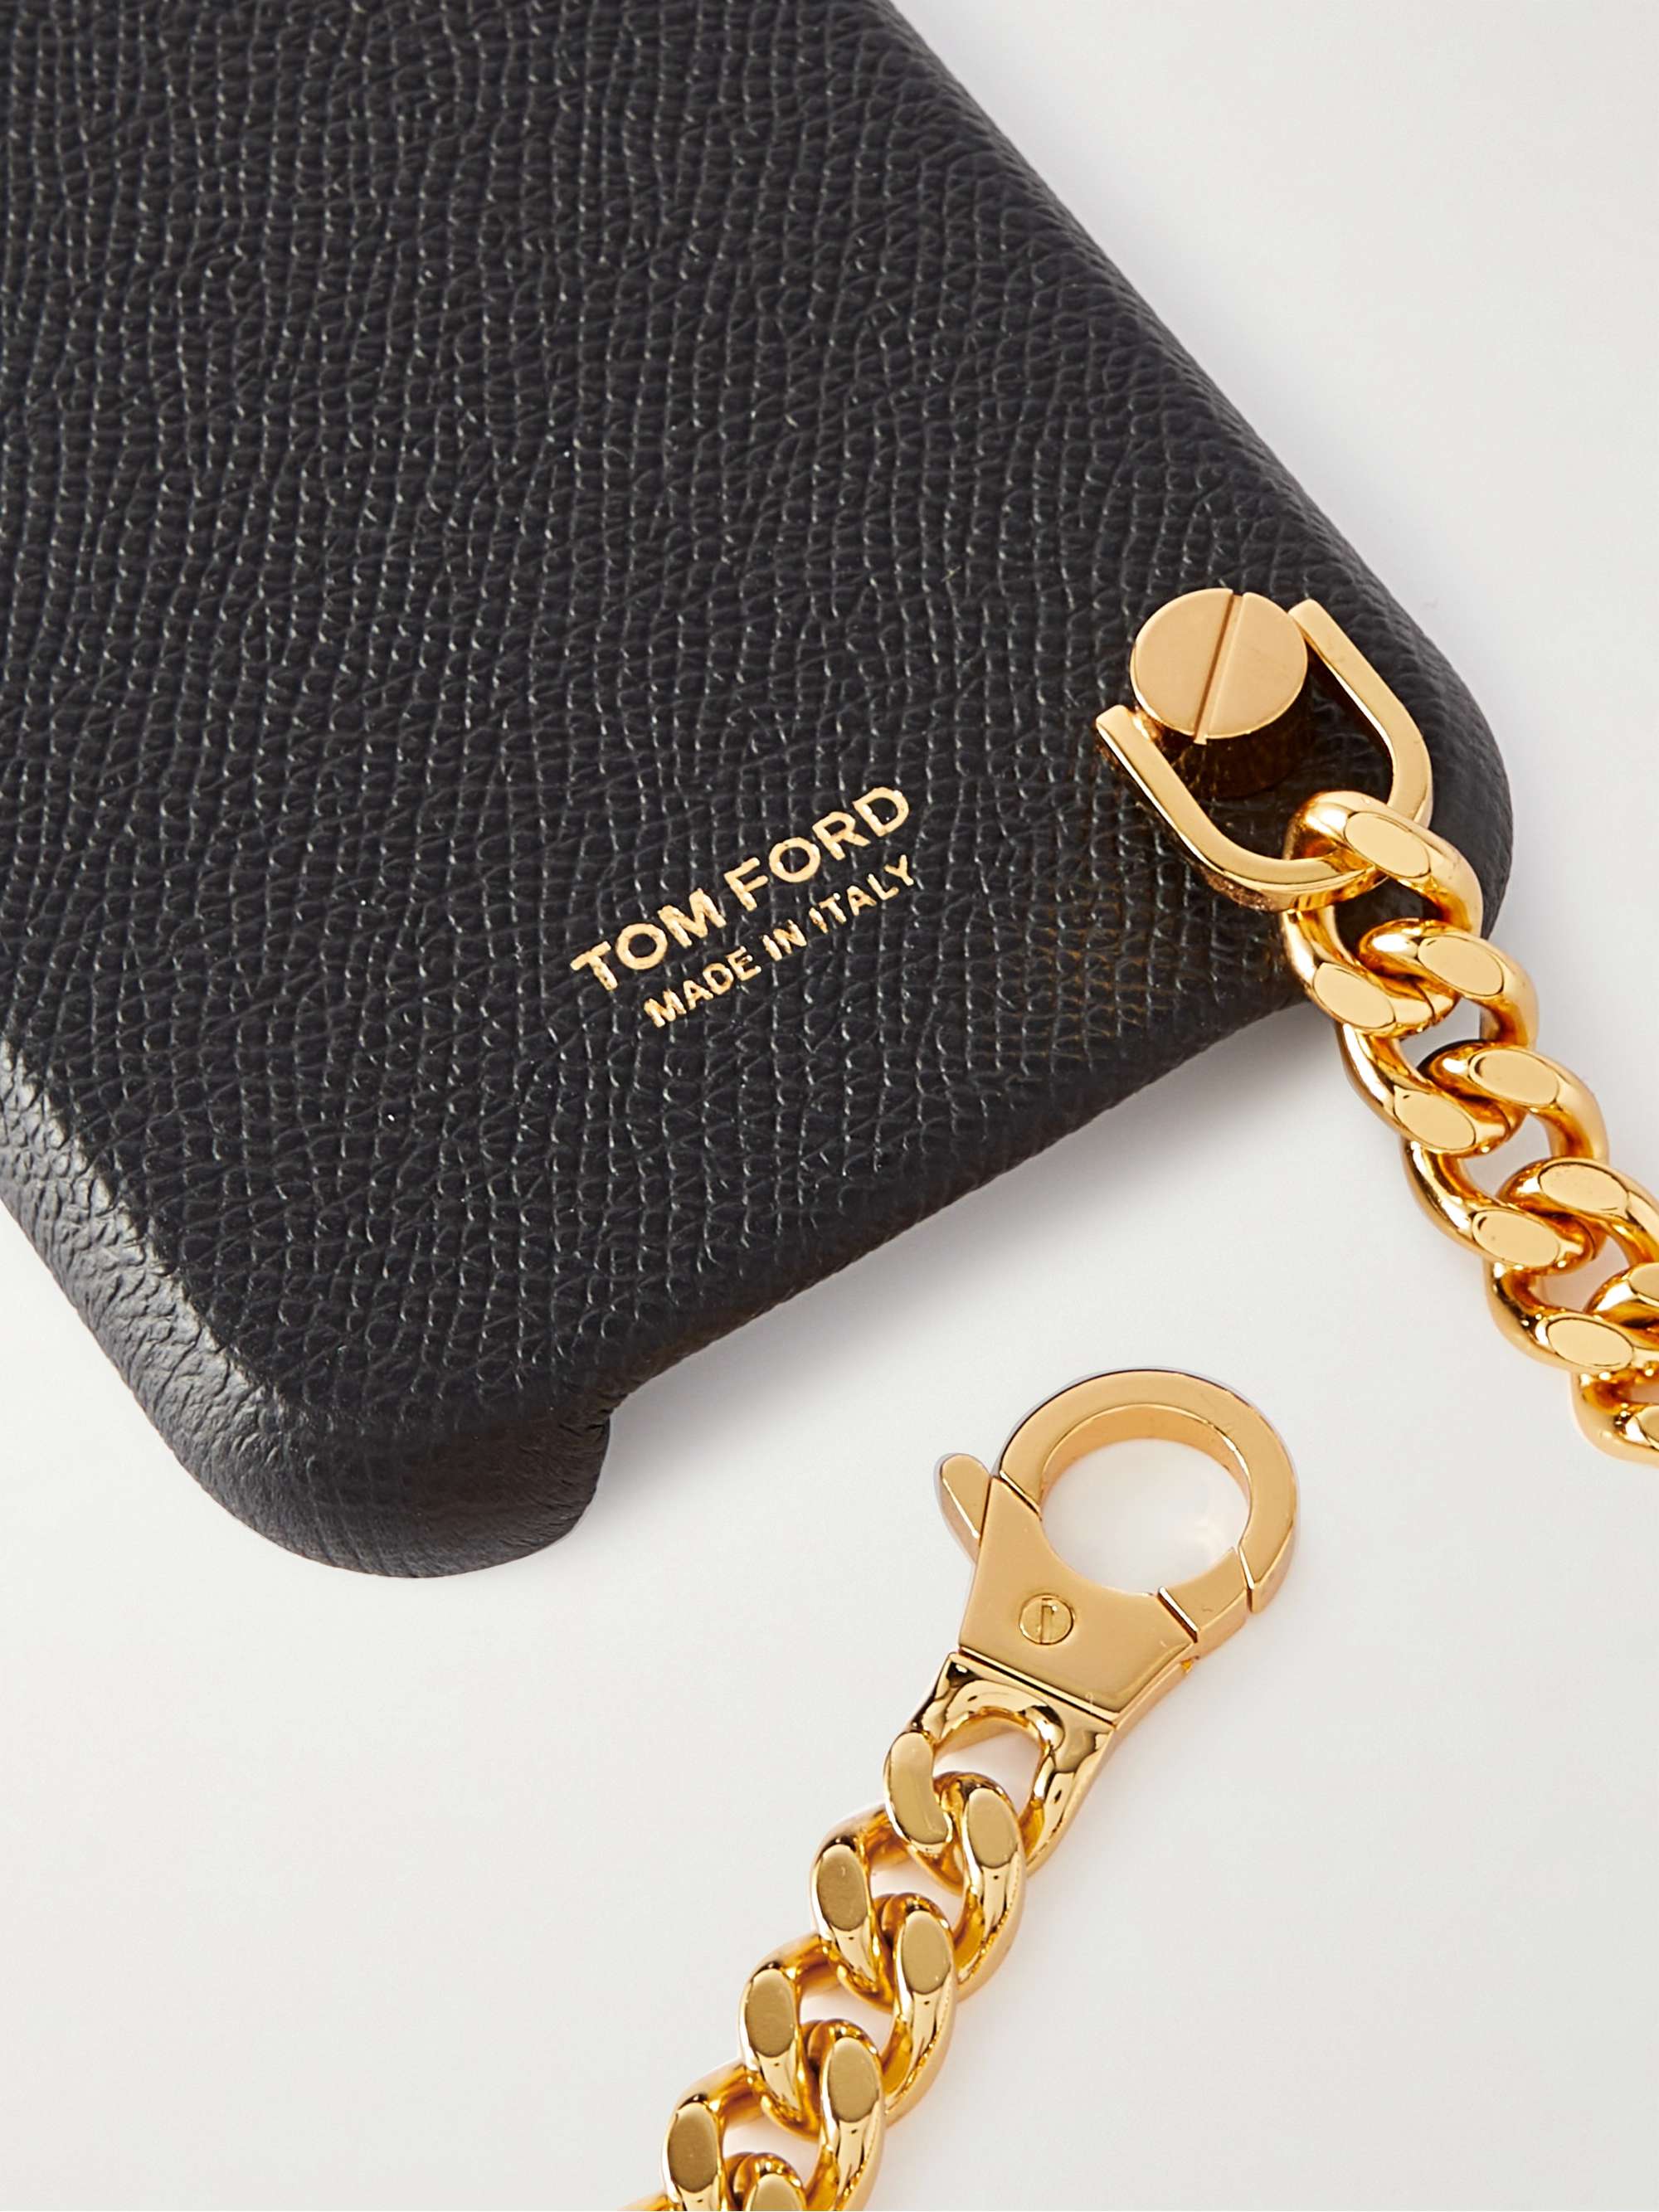 TOM FORD Logo-Print Full-Grain Leather iPhone 12 Pro Case with Chain